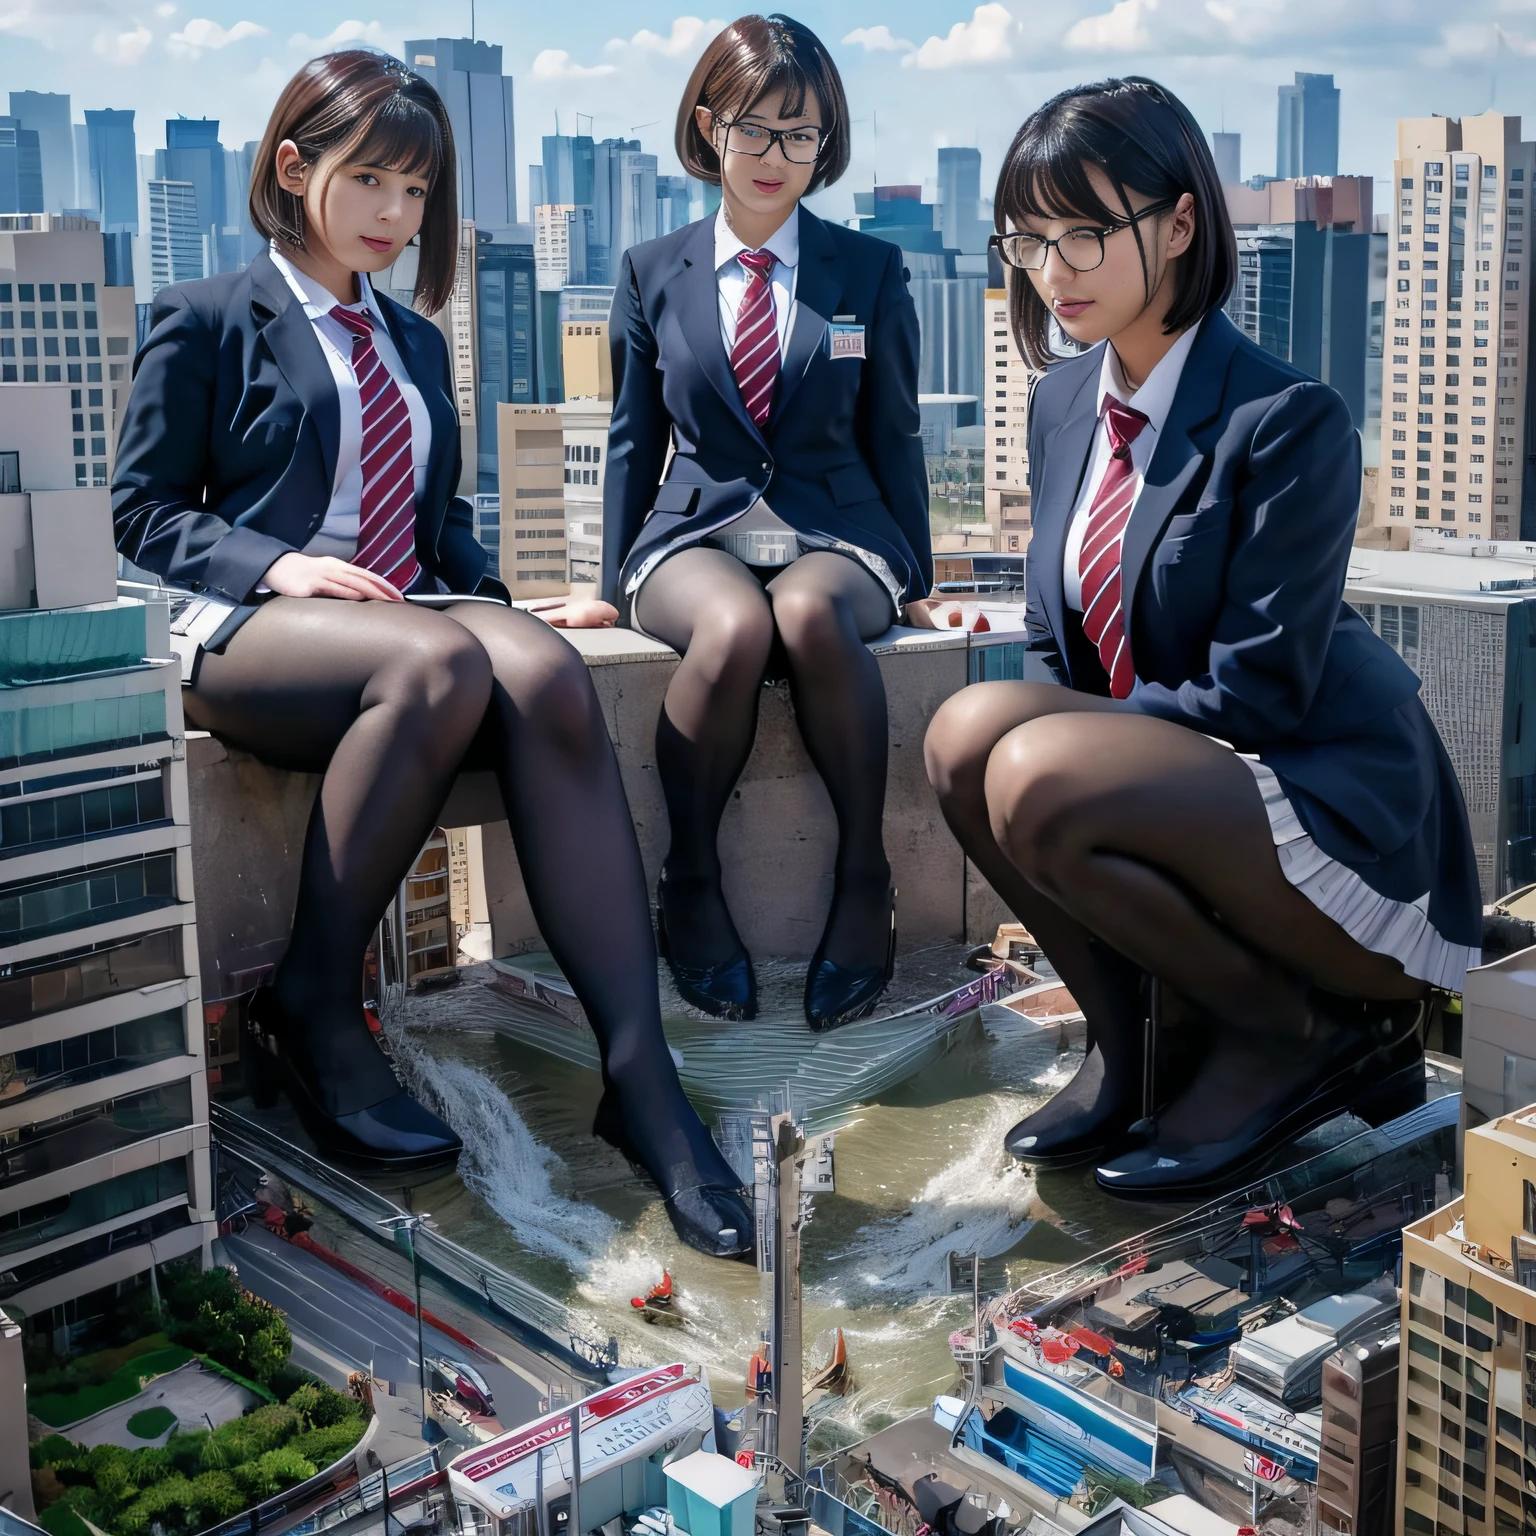 Multiple girls, giantess art, a hyperrealistic , , highly detailed giantess shot, der riese, Shorthair, Black pantyhose, Giant high school girl much bigger than a skyscraper。Wearing rimless glasses。Colossal 。Navy blue blazer、Red tie、Mini Length Skirt、Black pantyhose、I'm not wearing shoes.。very small metropoliiniature metropolis。In a miniature metropolis just a few feet tall.、squatting and urinating。Urine Falls。torrent of urine。sea of urine。Small trains and cars are washed away with urine.。Full body depiction。nffsw, der riese, Black pantyhose, Pantyhose legs, Pantyhose feet, ,Stomping City,crash city,Small town,micro city, Peeing,